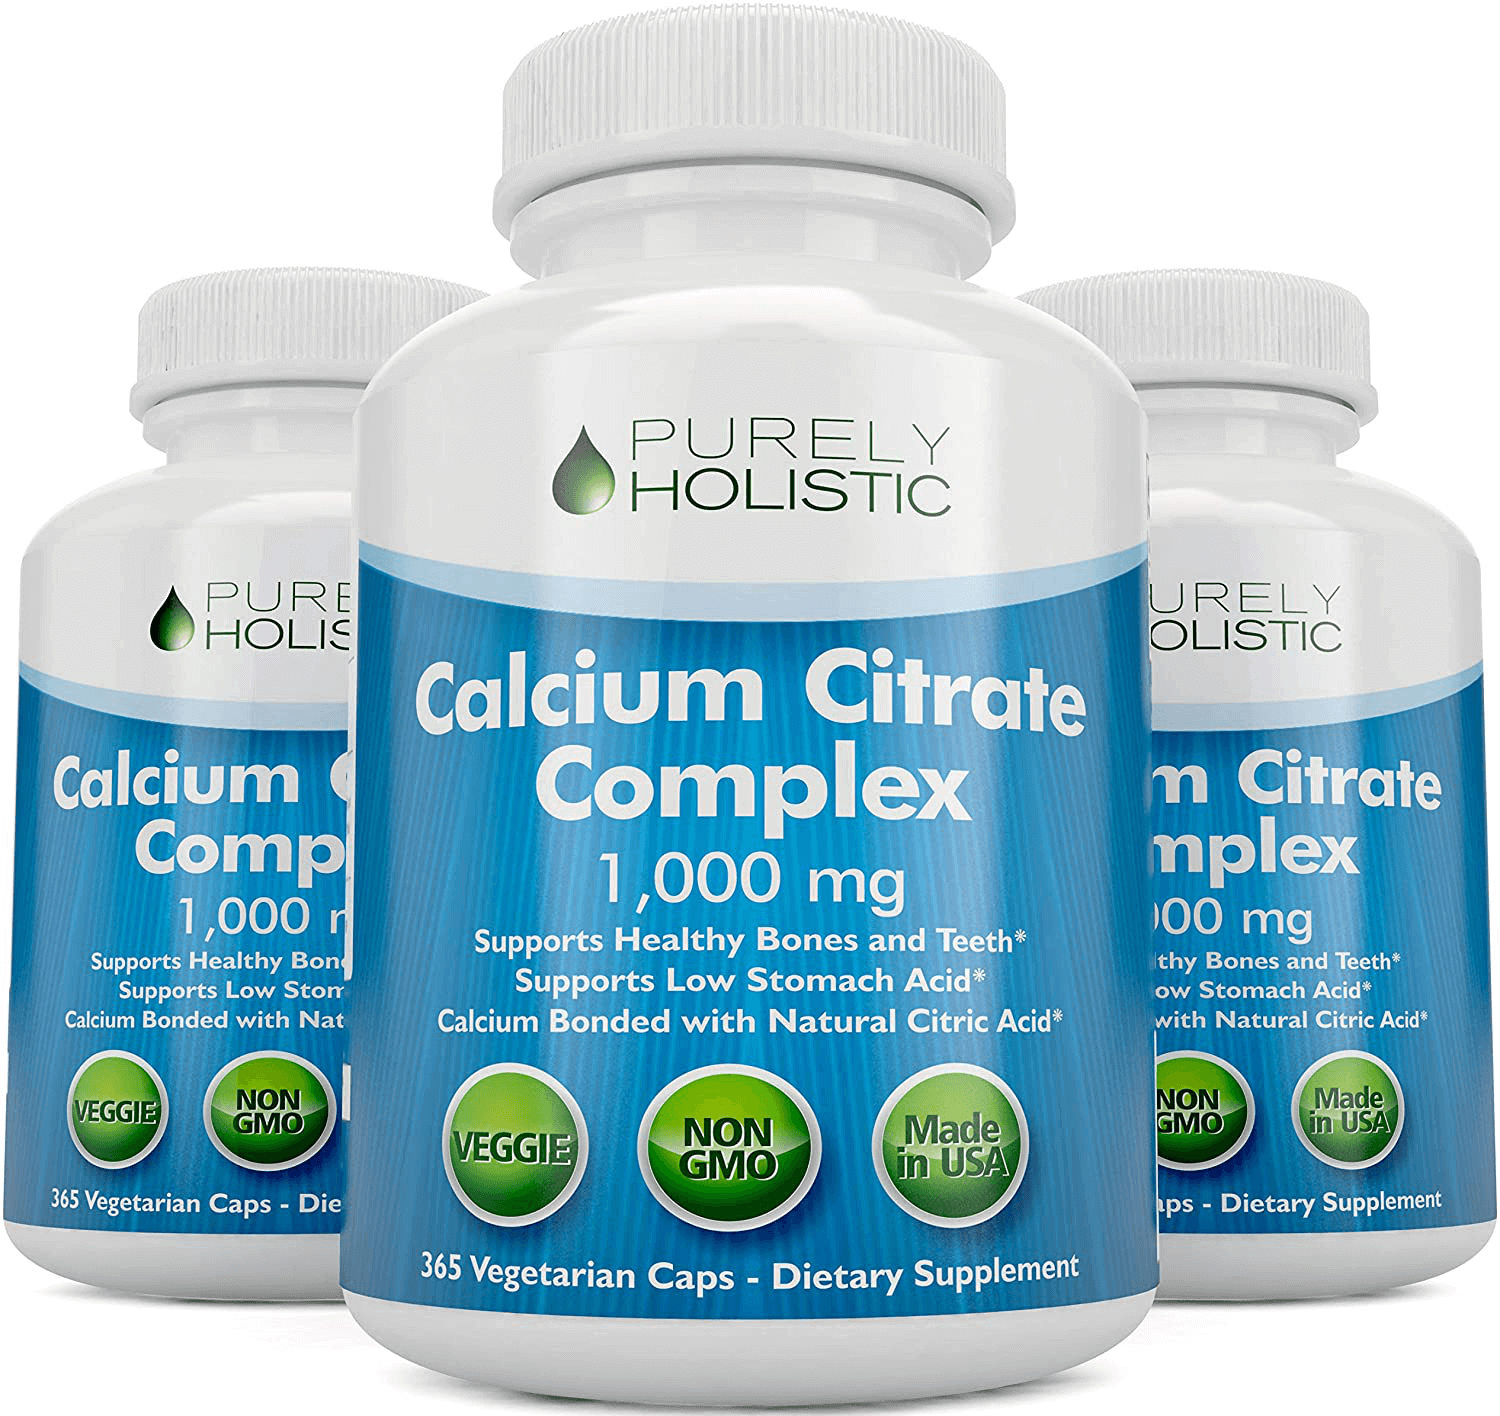 Calcium Citrate 1000mg - 365 Vegan Capsules not Tablets - Supports Health of Bones and Teeth - with Added Parsley, Dandelion and Watercress - Without Vitamin D - Made in The USA by Purely Holistic - vitamenstore.com